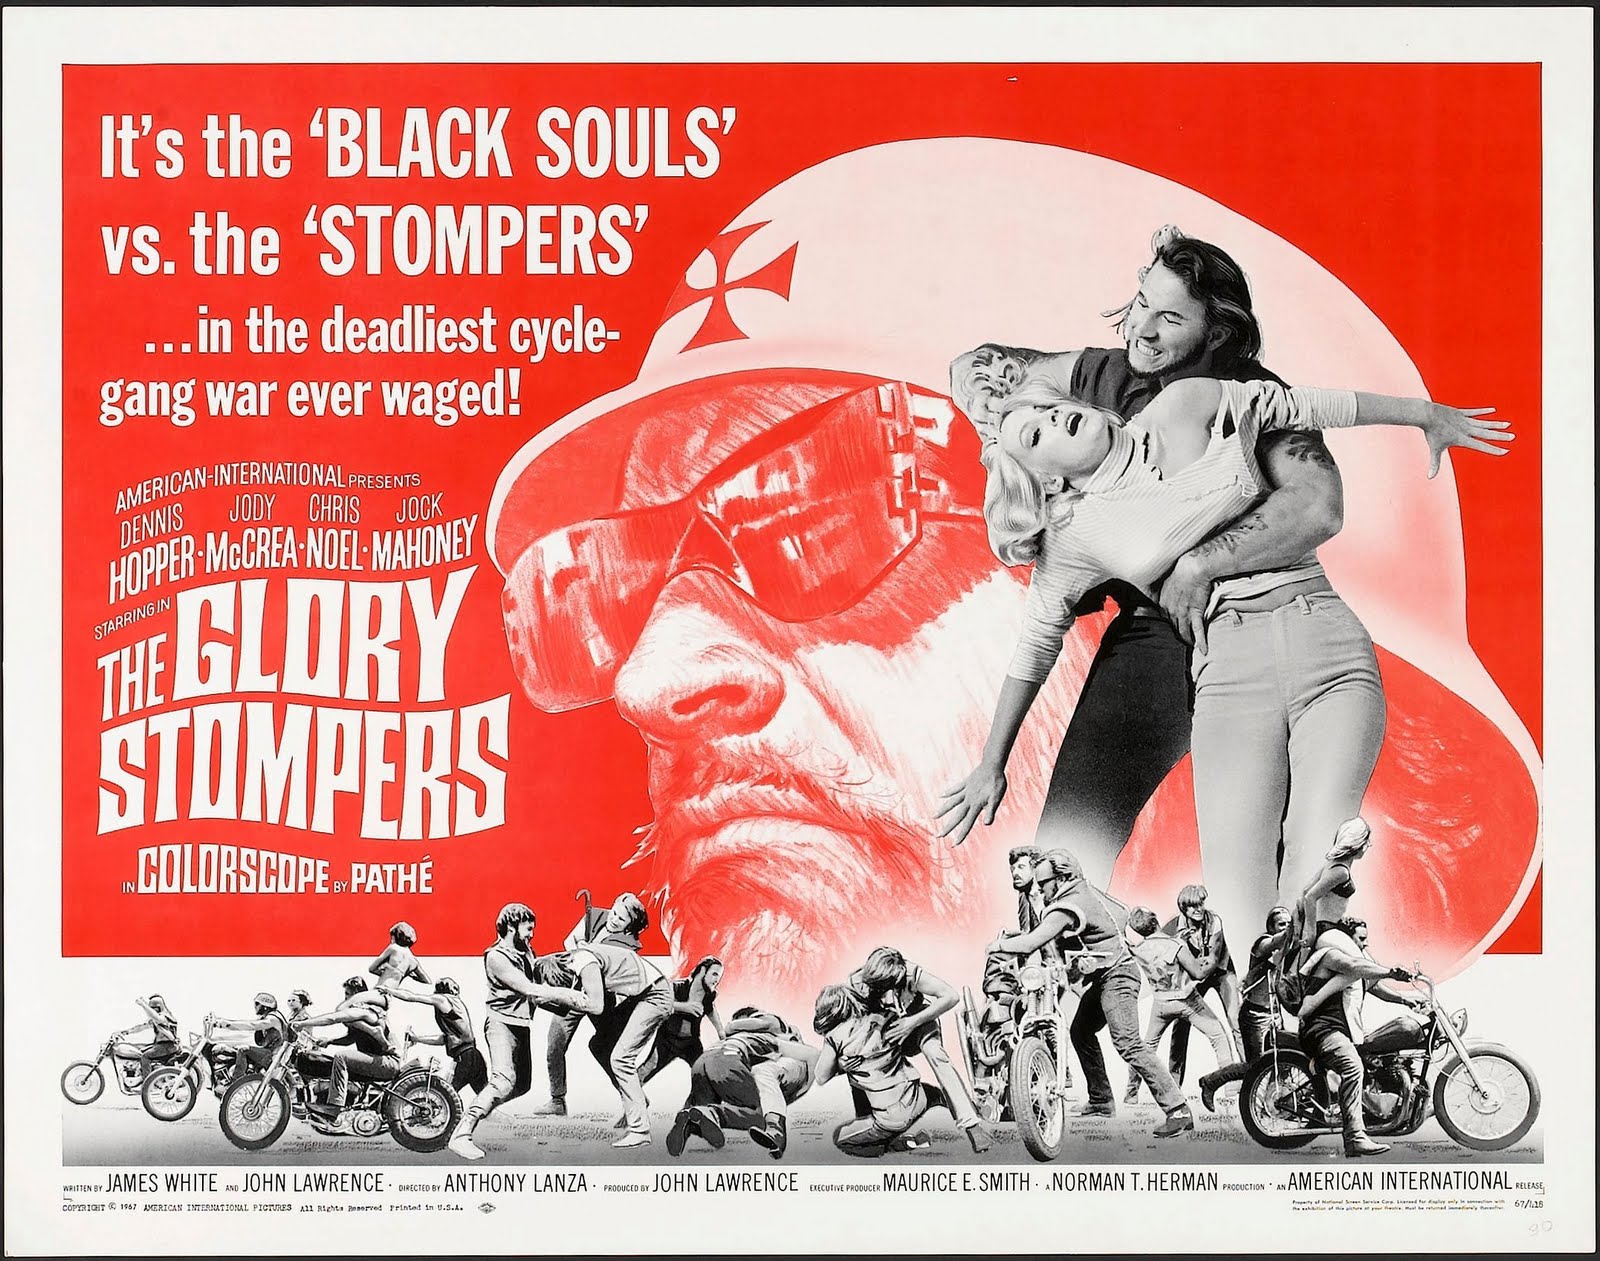 Poster for The Glory Stompers, starring Dennis Hopper and Jody McCrea